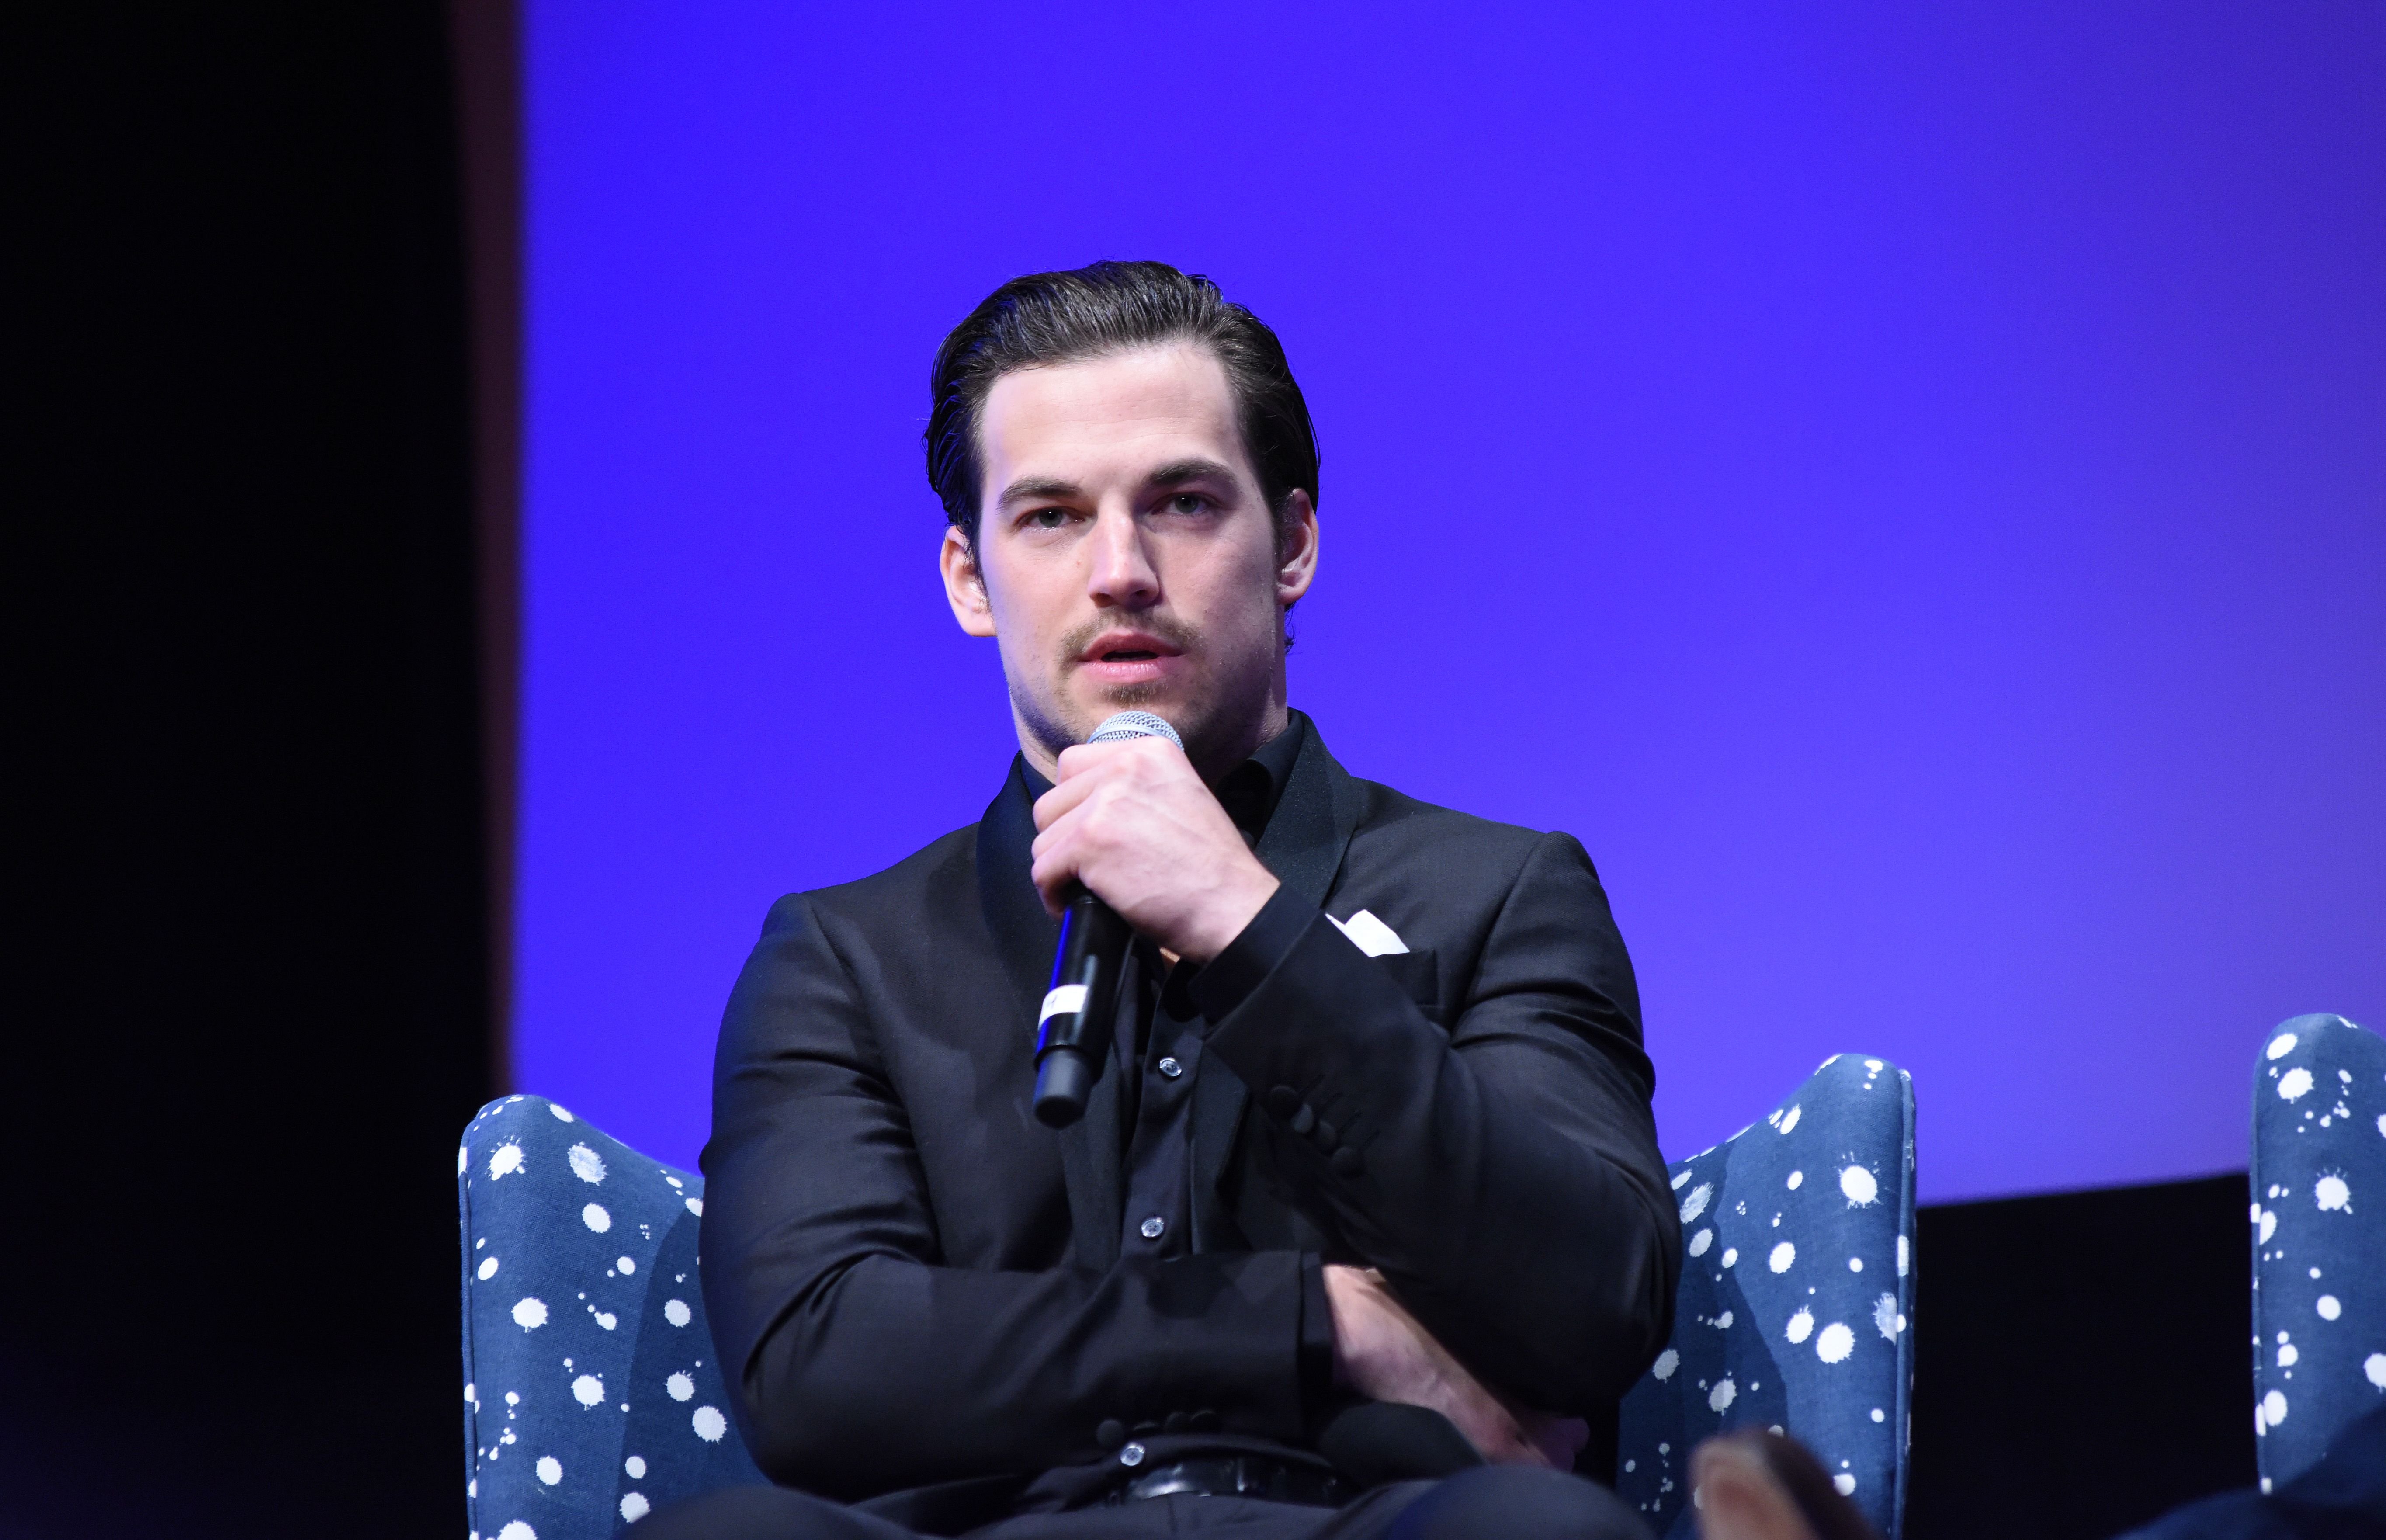 Giacomo Gianniotti spoke at a "Grey's Anatomy" event at TV fest 2016 presented by SCAD on February 4, 2016 | Photo: Getty Images